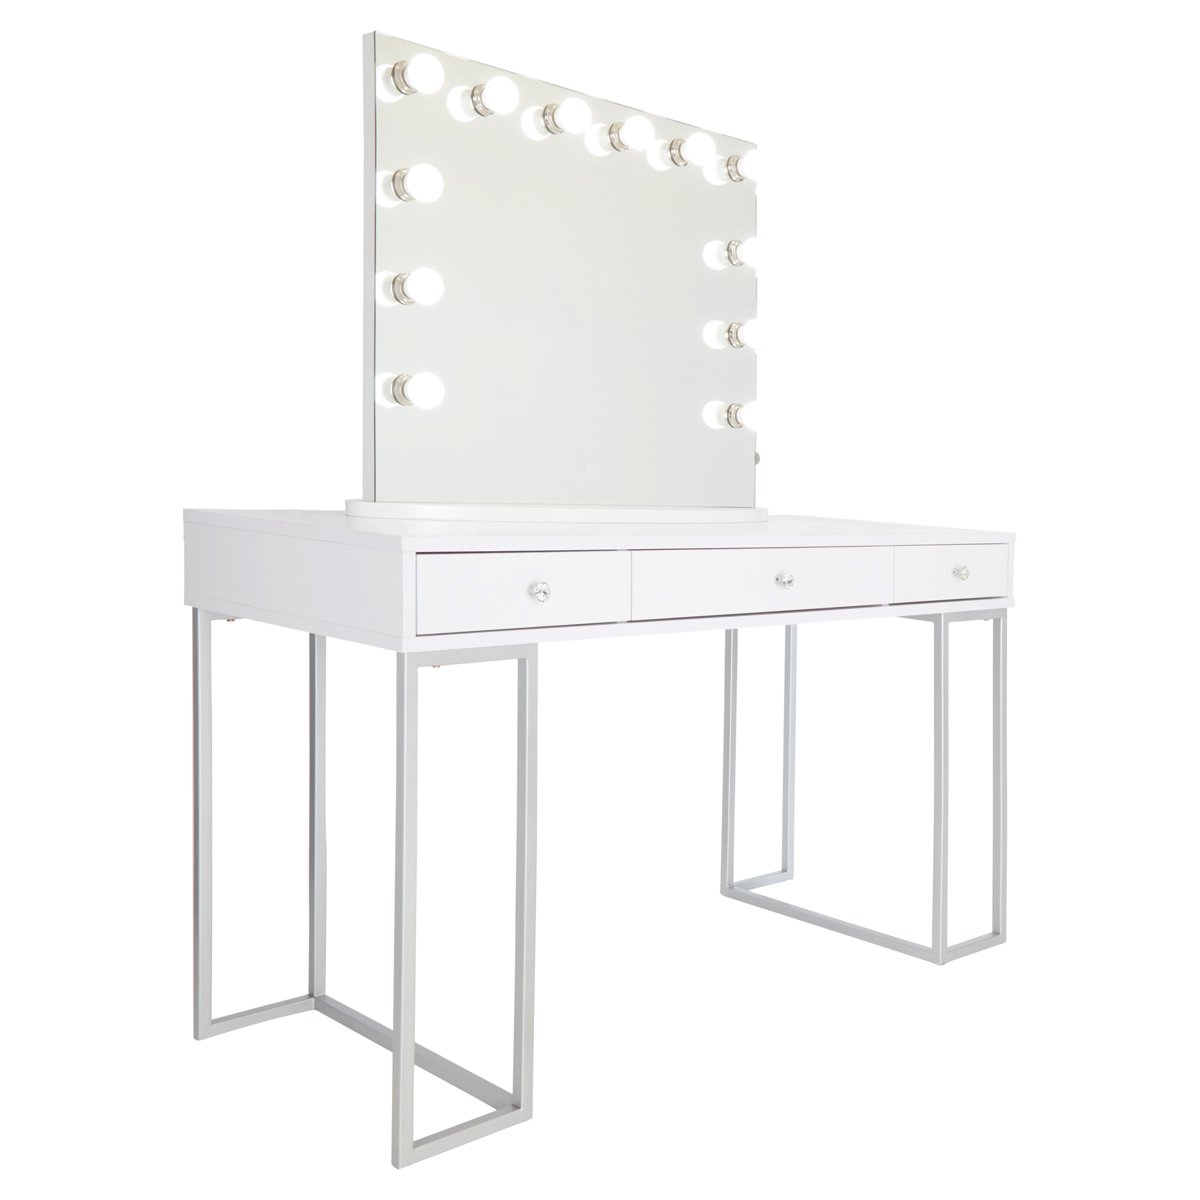 Impressions Vanity Premium Makeup Desk, Celeste Modern Table with 3 Drawers and Crystal Knobs, Perfect for Bedroom Decore (White) - image 6 of 6